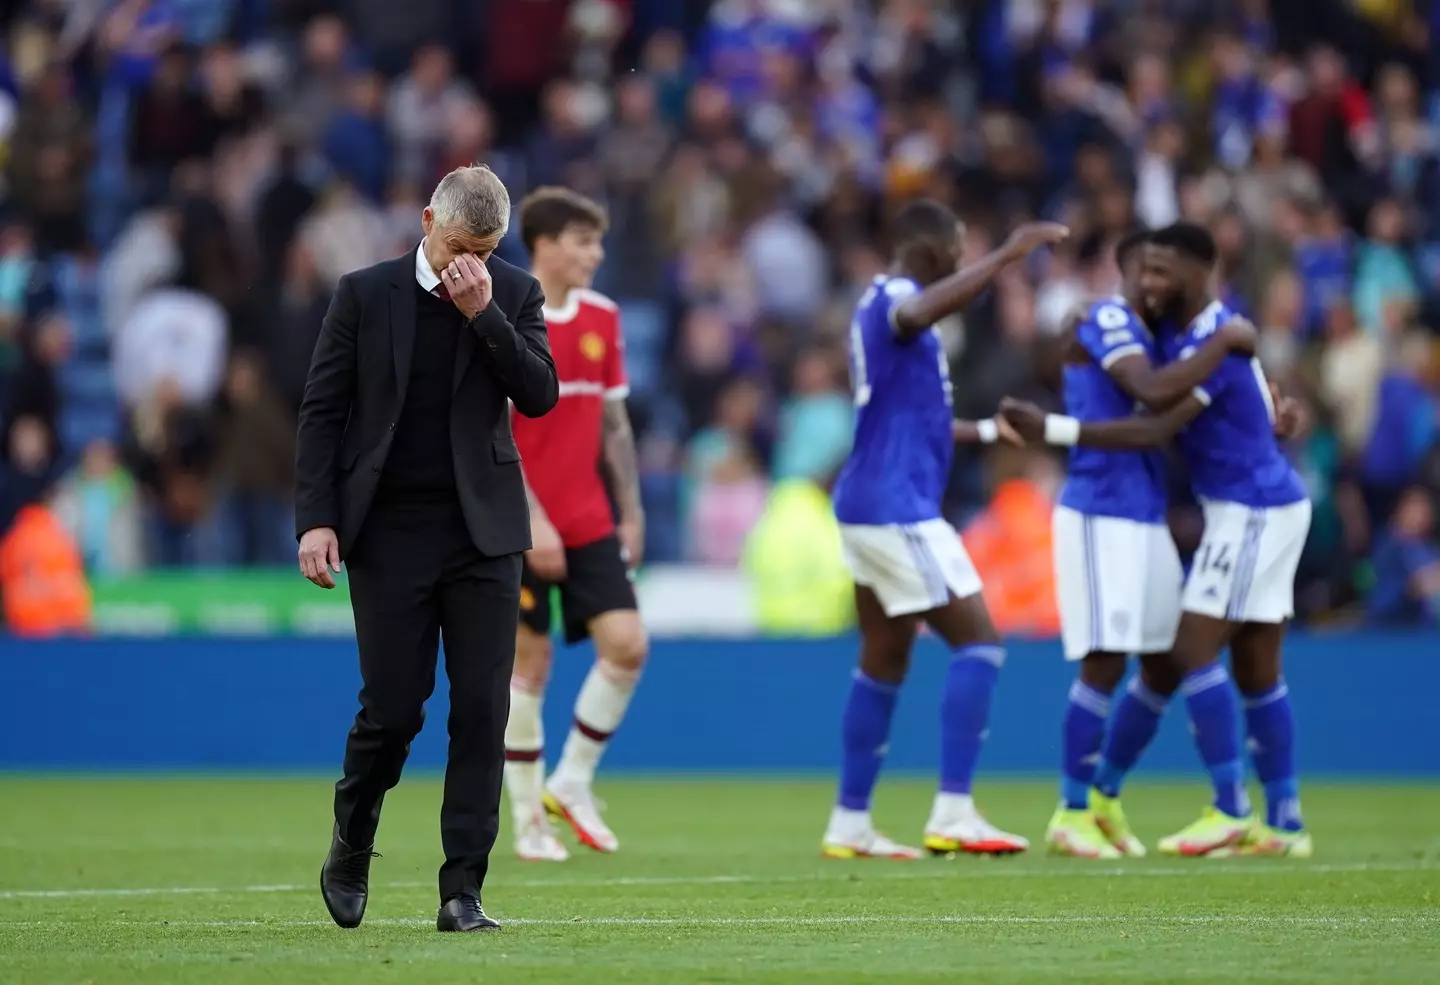 Solskjaer looked downbeat after the loss. Image: PA Images